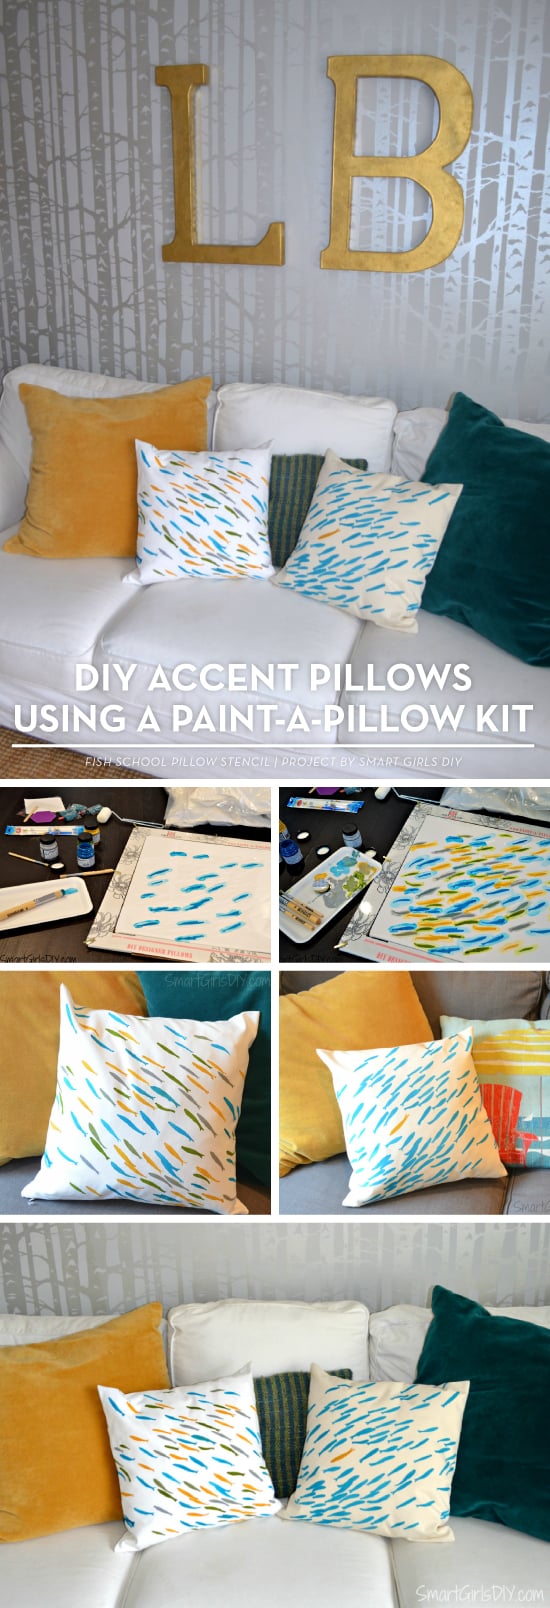 Cutting Edge Stencils shares DIY stenciled accent pillow using the Fish School Paint-A-Pillow stencil kit. http://paintapillow.com/index.php/fish-school-paint-a-pillow-kit.html